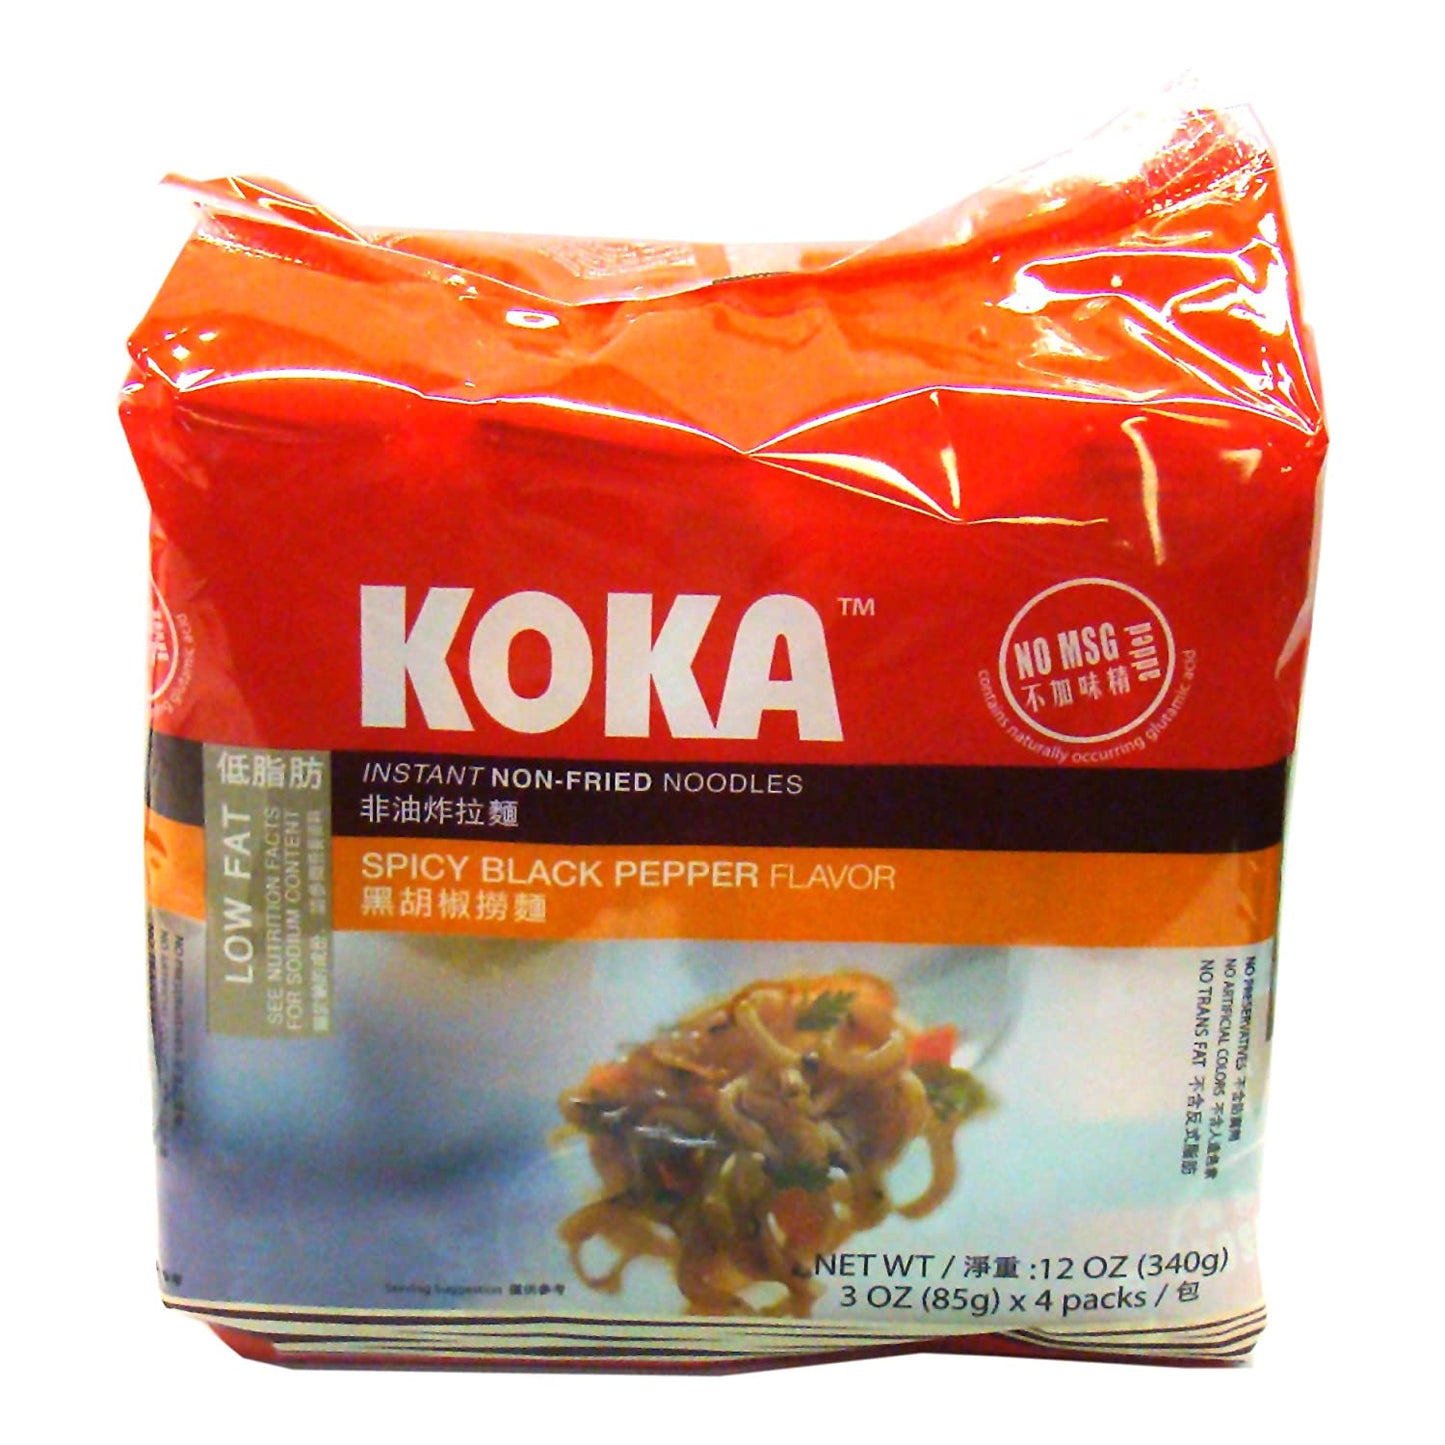 Koka Spicy Black Pepper (Non-Fried Noodles), 85-Grams (Pack of 24)